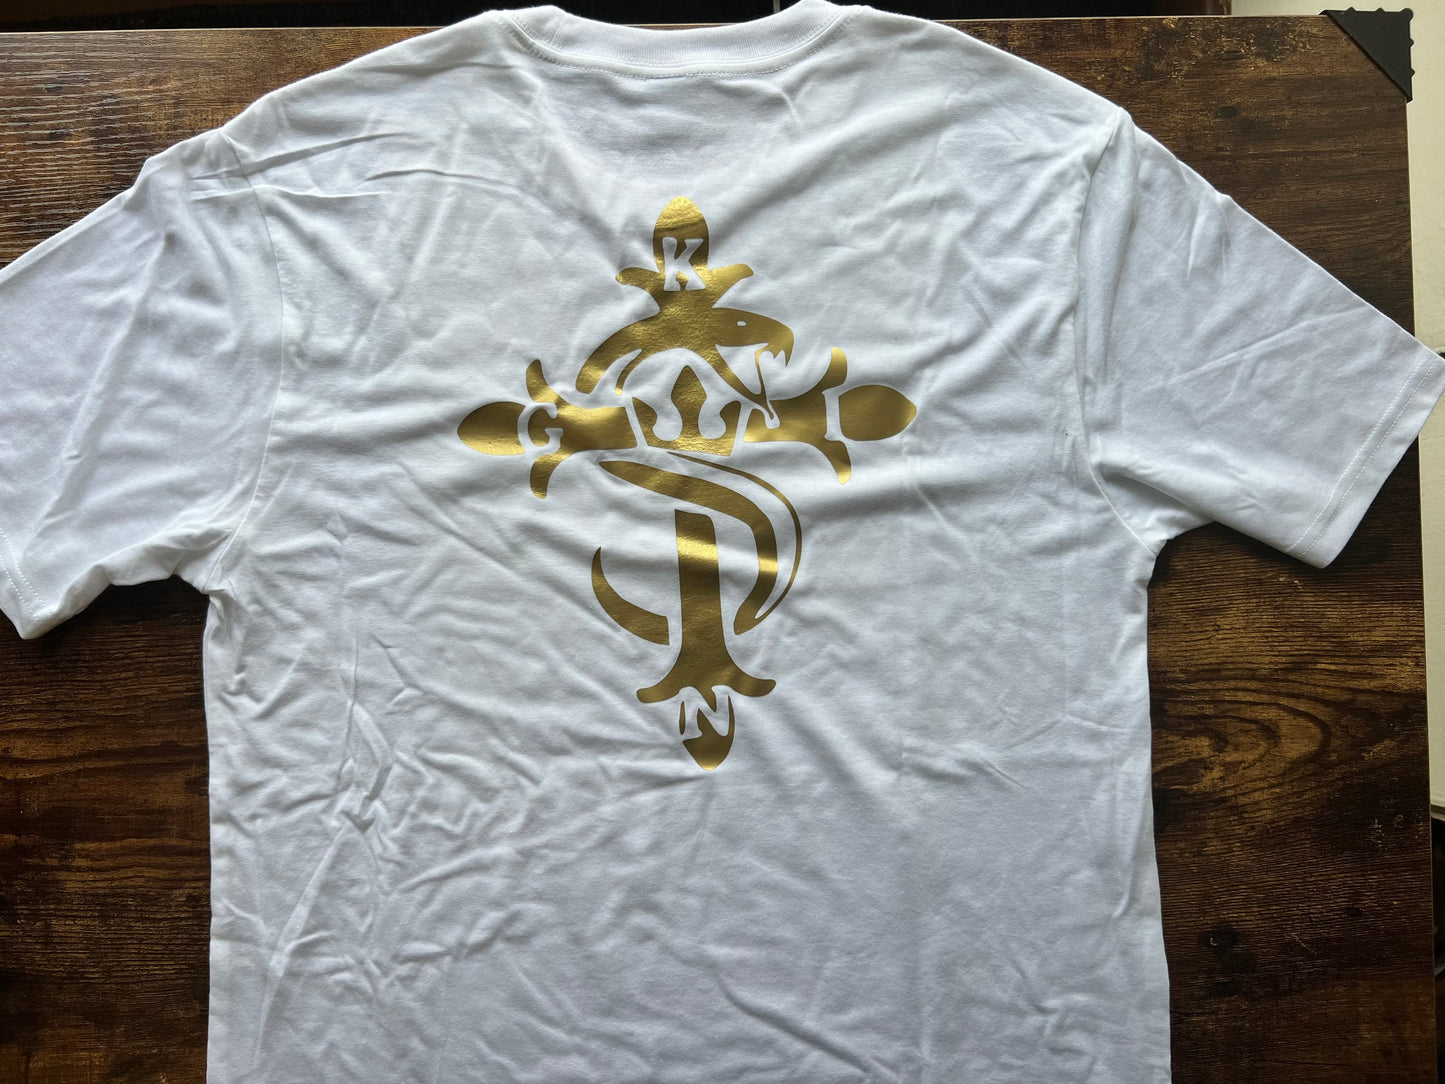 Official King Mar Entertainment T-Shirts black, white (gold), white (black) available in all sizes (XS-XXL)